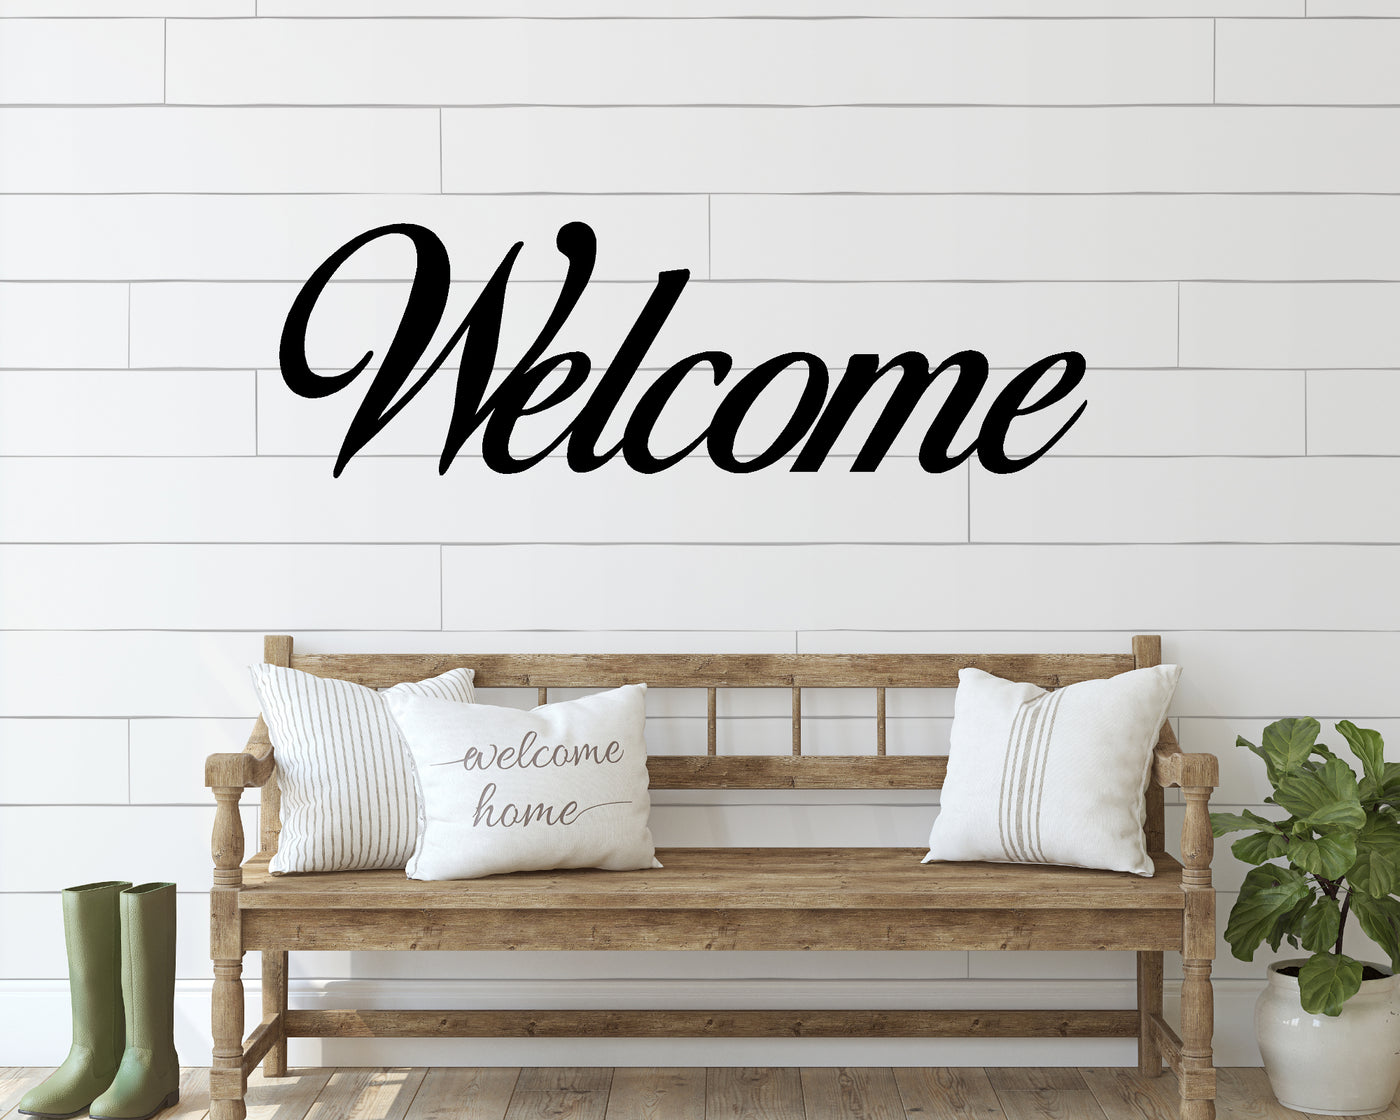 Welcome Metal Word Sign - Madison Iron and Wood - Wall Art - metal outdoor decor - Steel deocrations - american made products - veteran owned business products - fencing decorations - fencing supplies - custom wall decorations - personalized wall signs - steel - decorative post caps - steel post caps - metal post caps - brackets - structural brackets - home improvement - easter - easter decorations - easter gift - easter yard decor